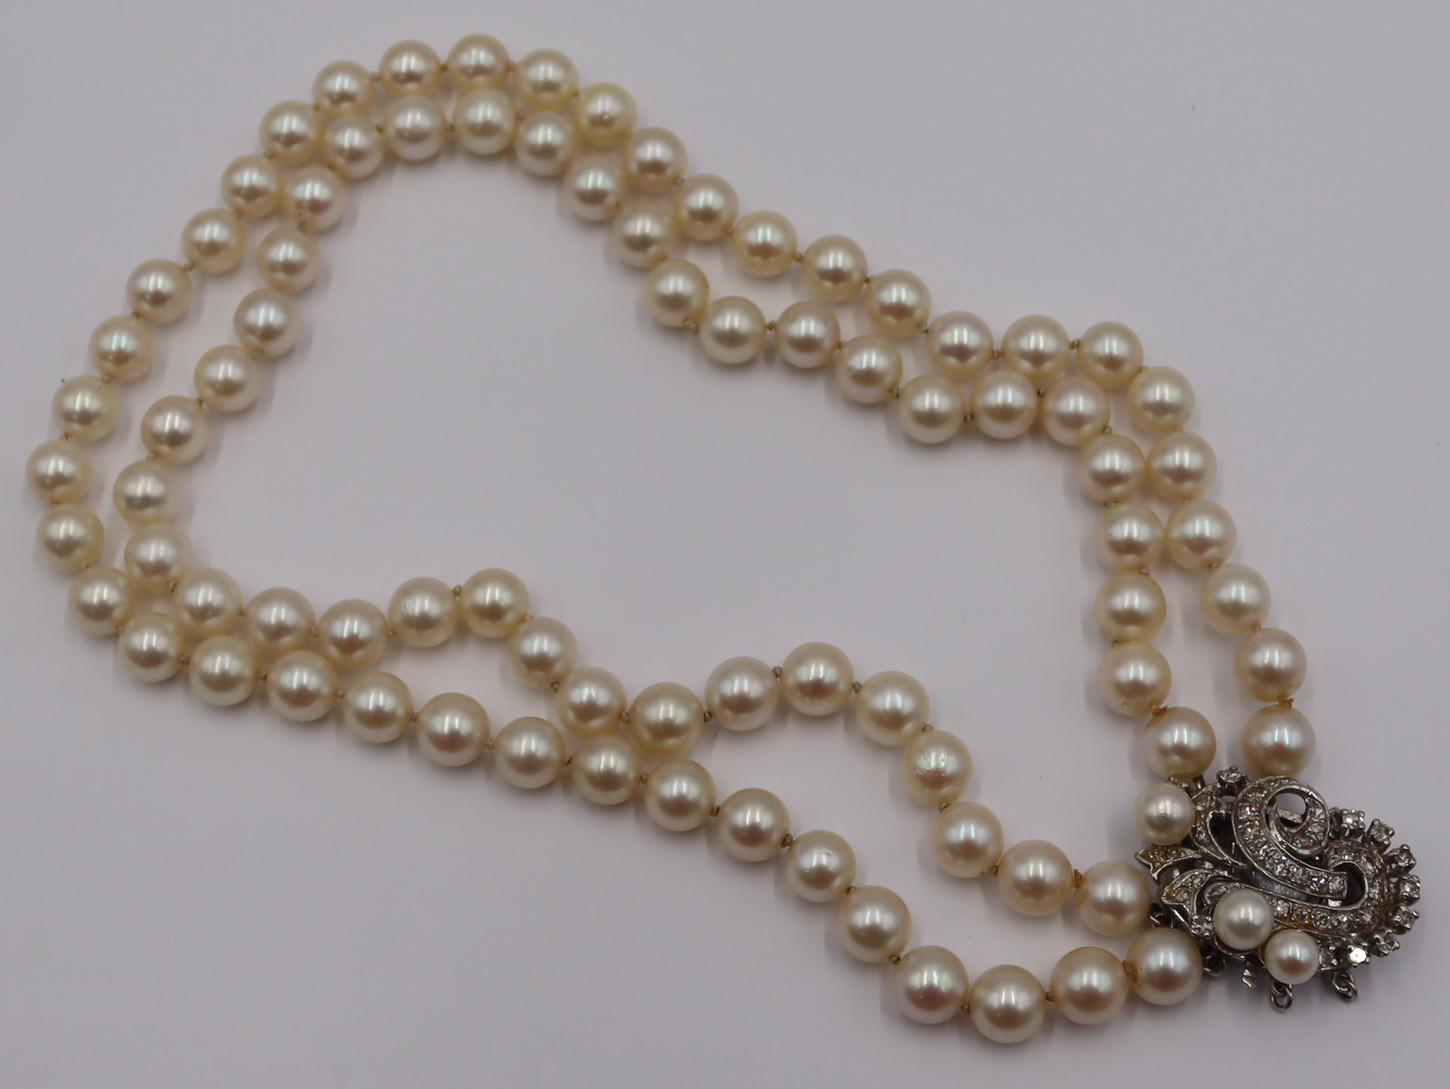 JEWELRY DOUBLE STRAND PEARL NECKLACE 3baa9b